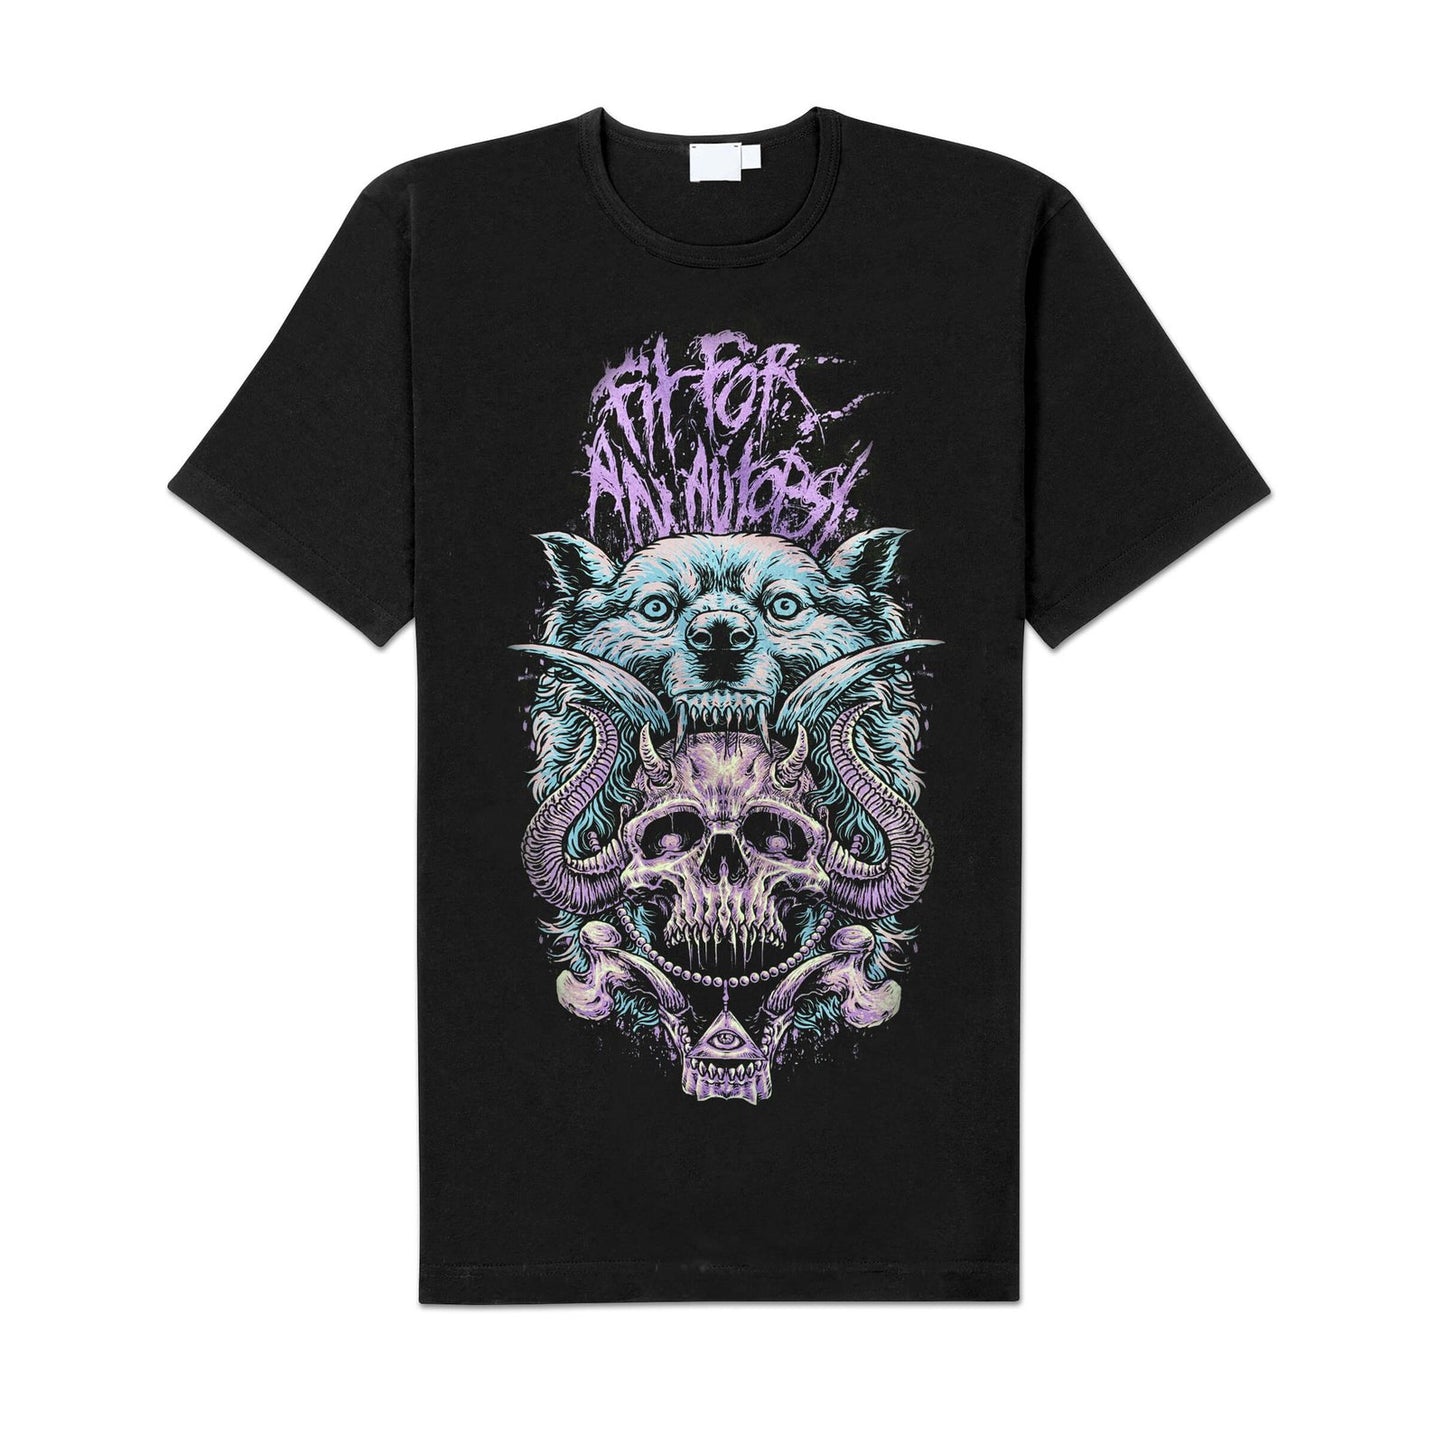 Fit For An Autopsy "Wolf" Shirt